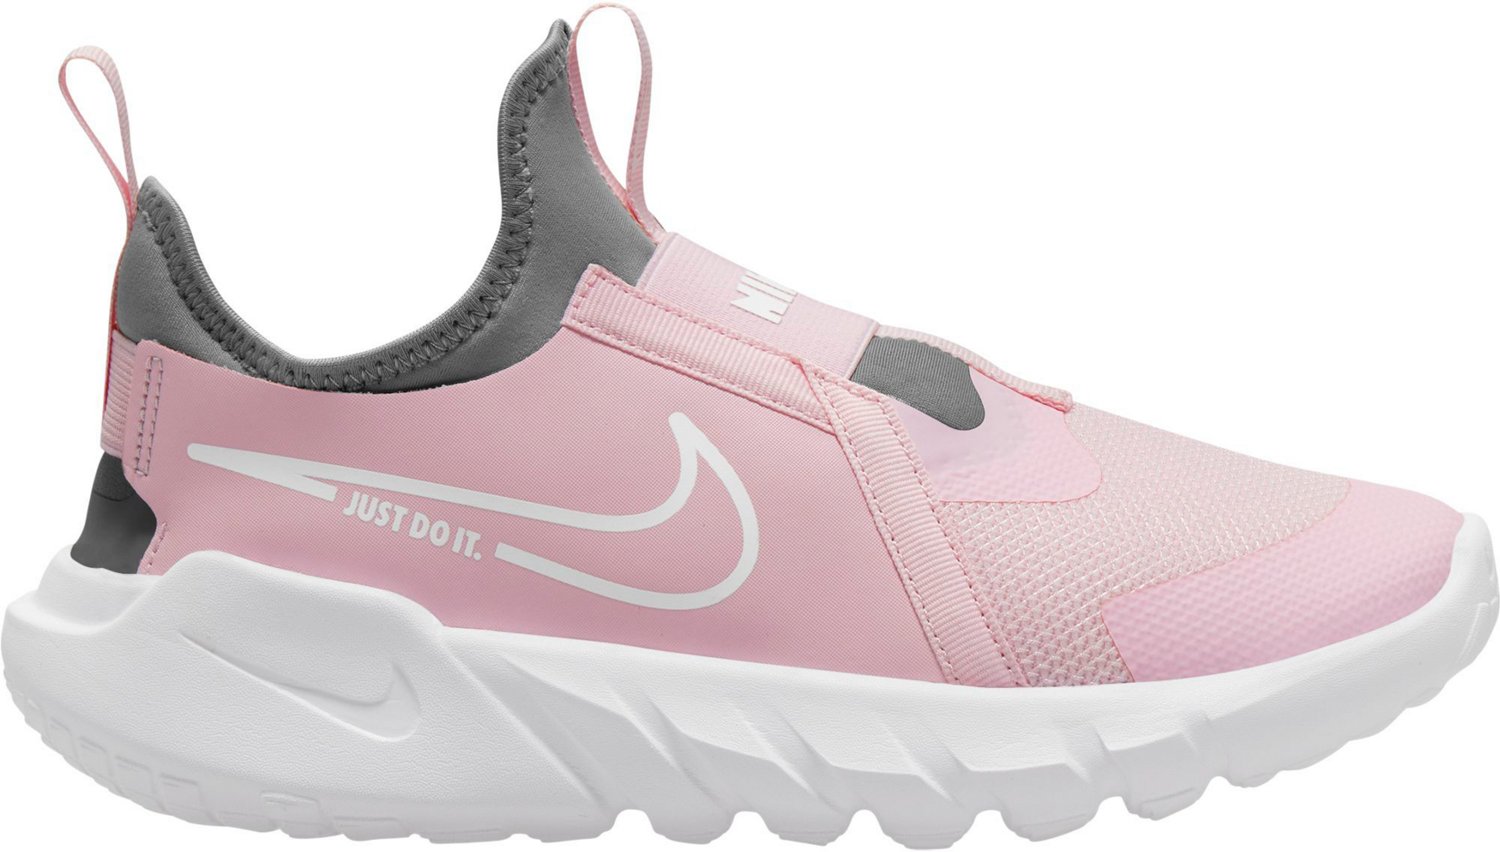 Runner Academy GS | Nike at 2 Kids\' Flex Shipping Free Shoes